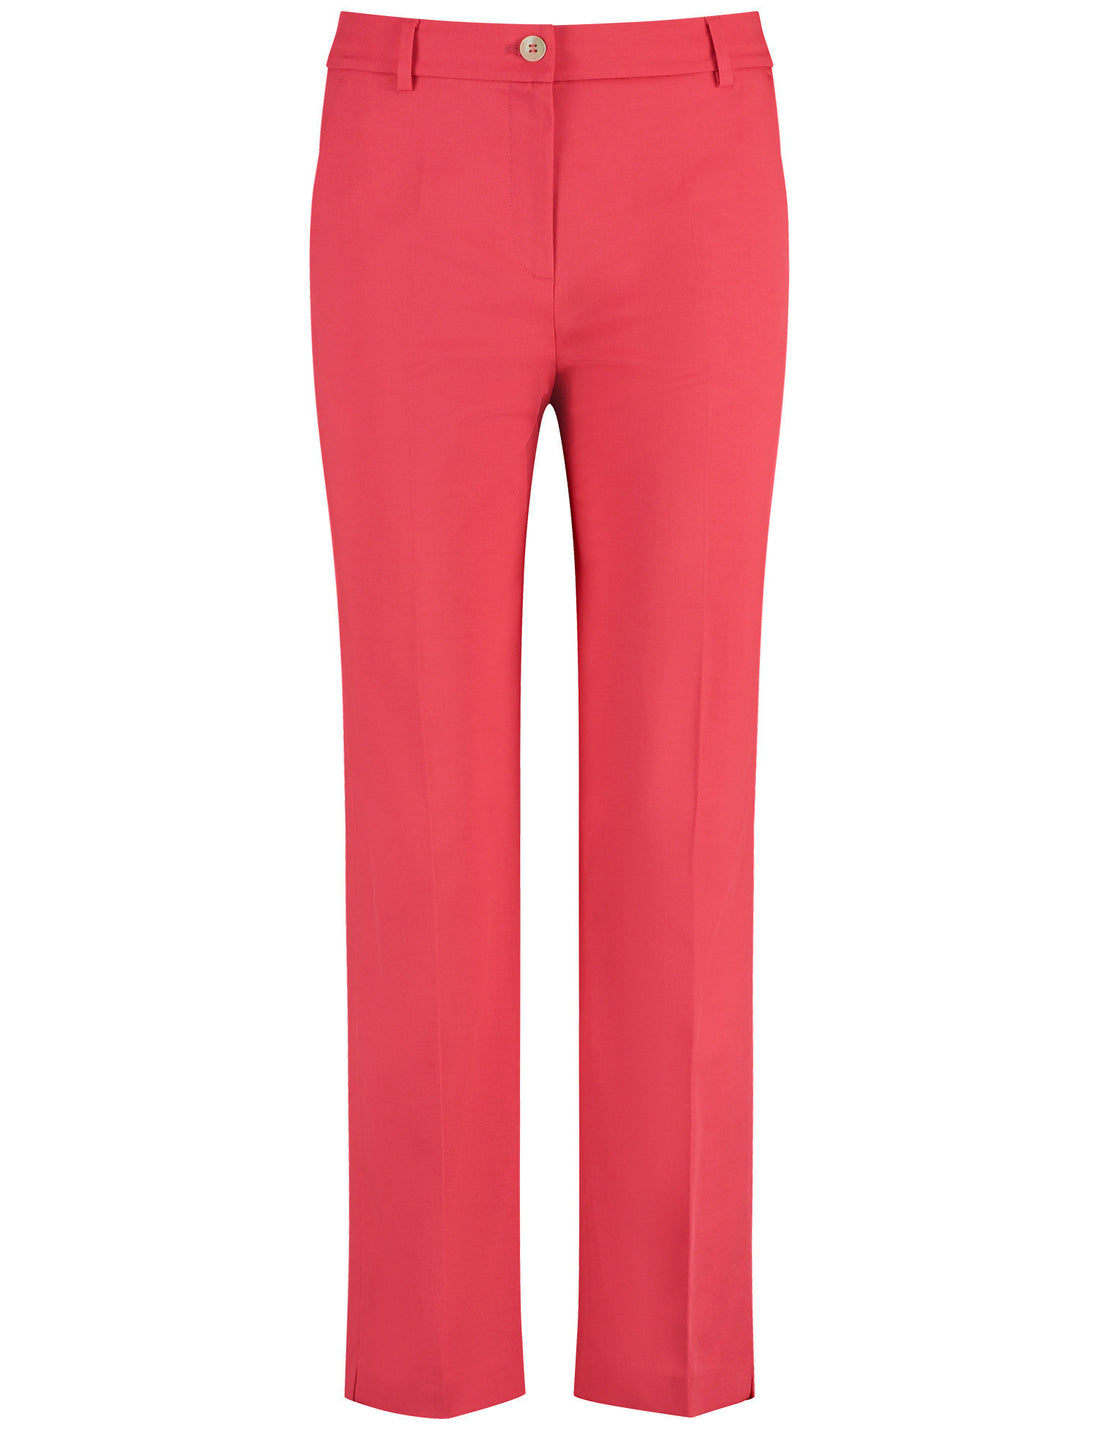 Elegant Trousers With Pressed Pleats_320003-31332_60140_02